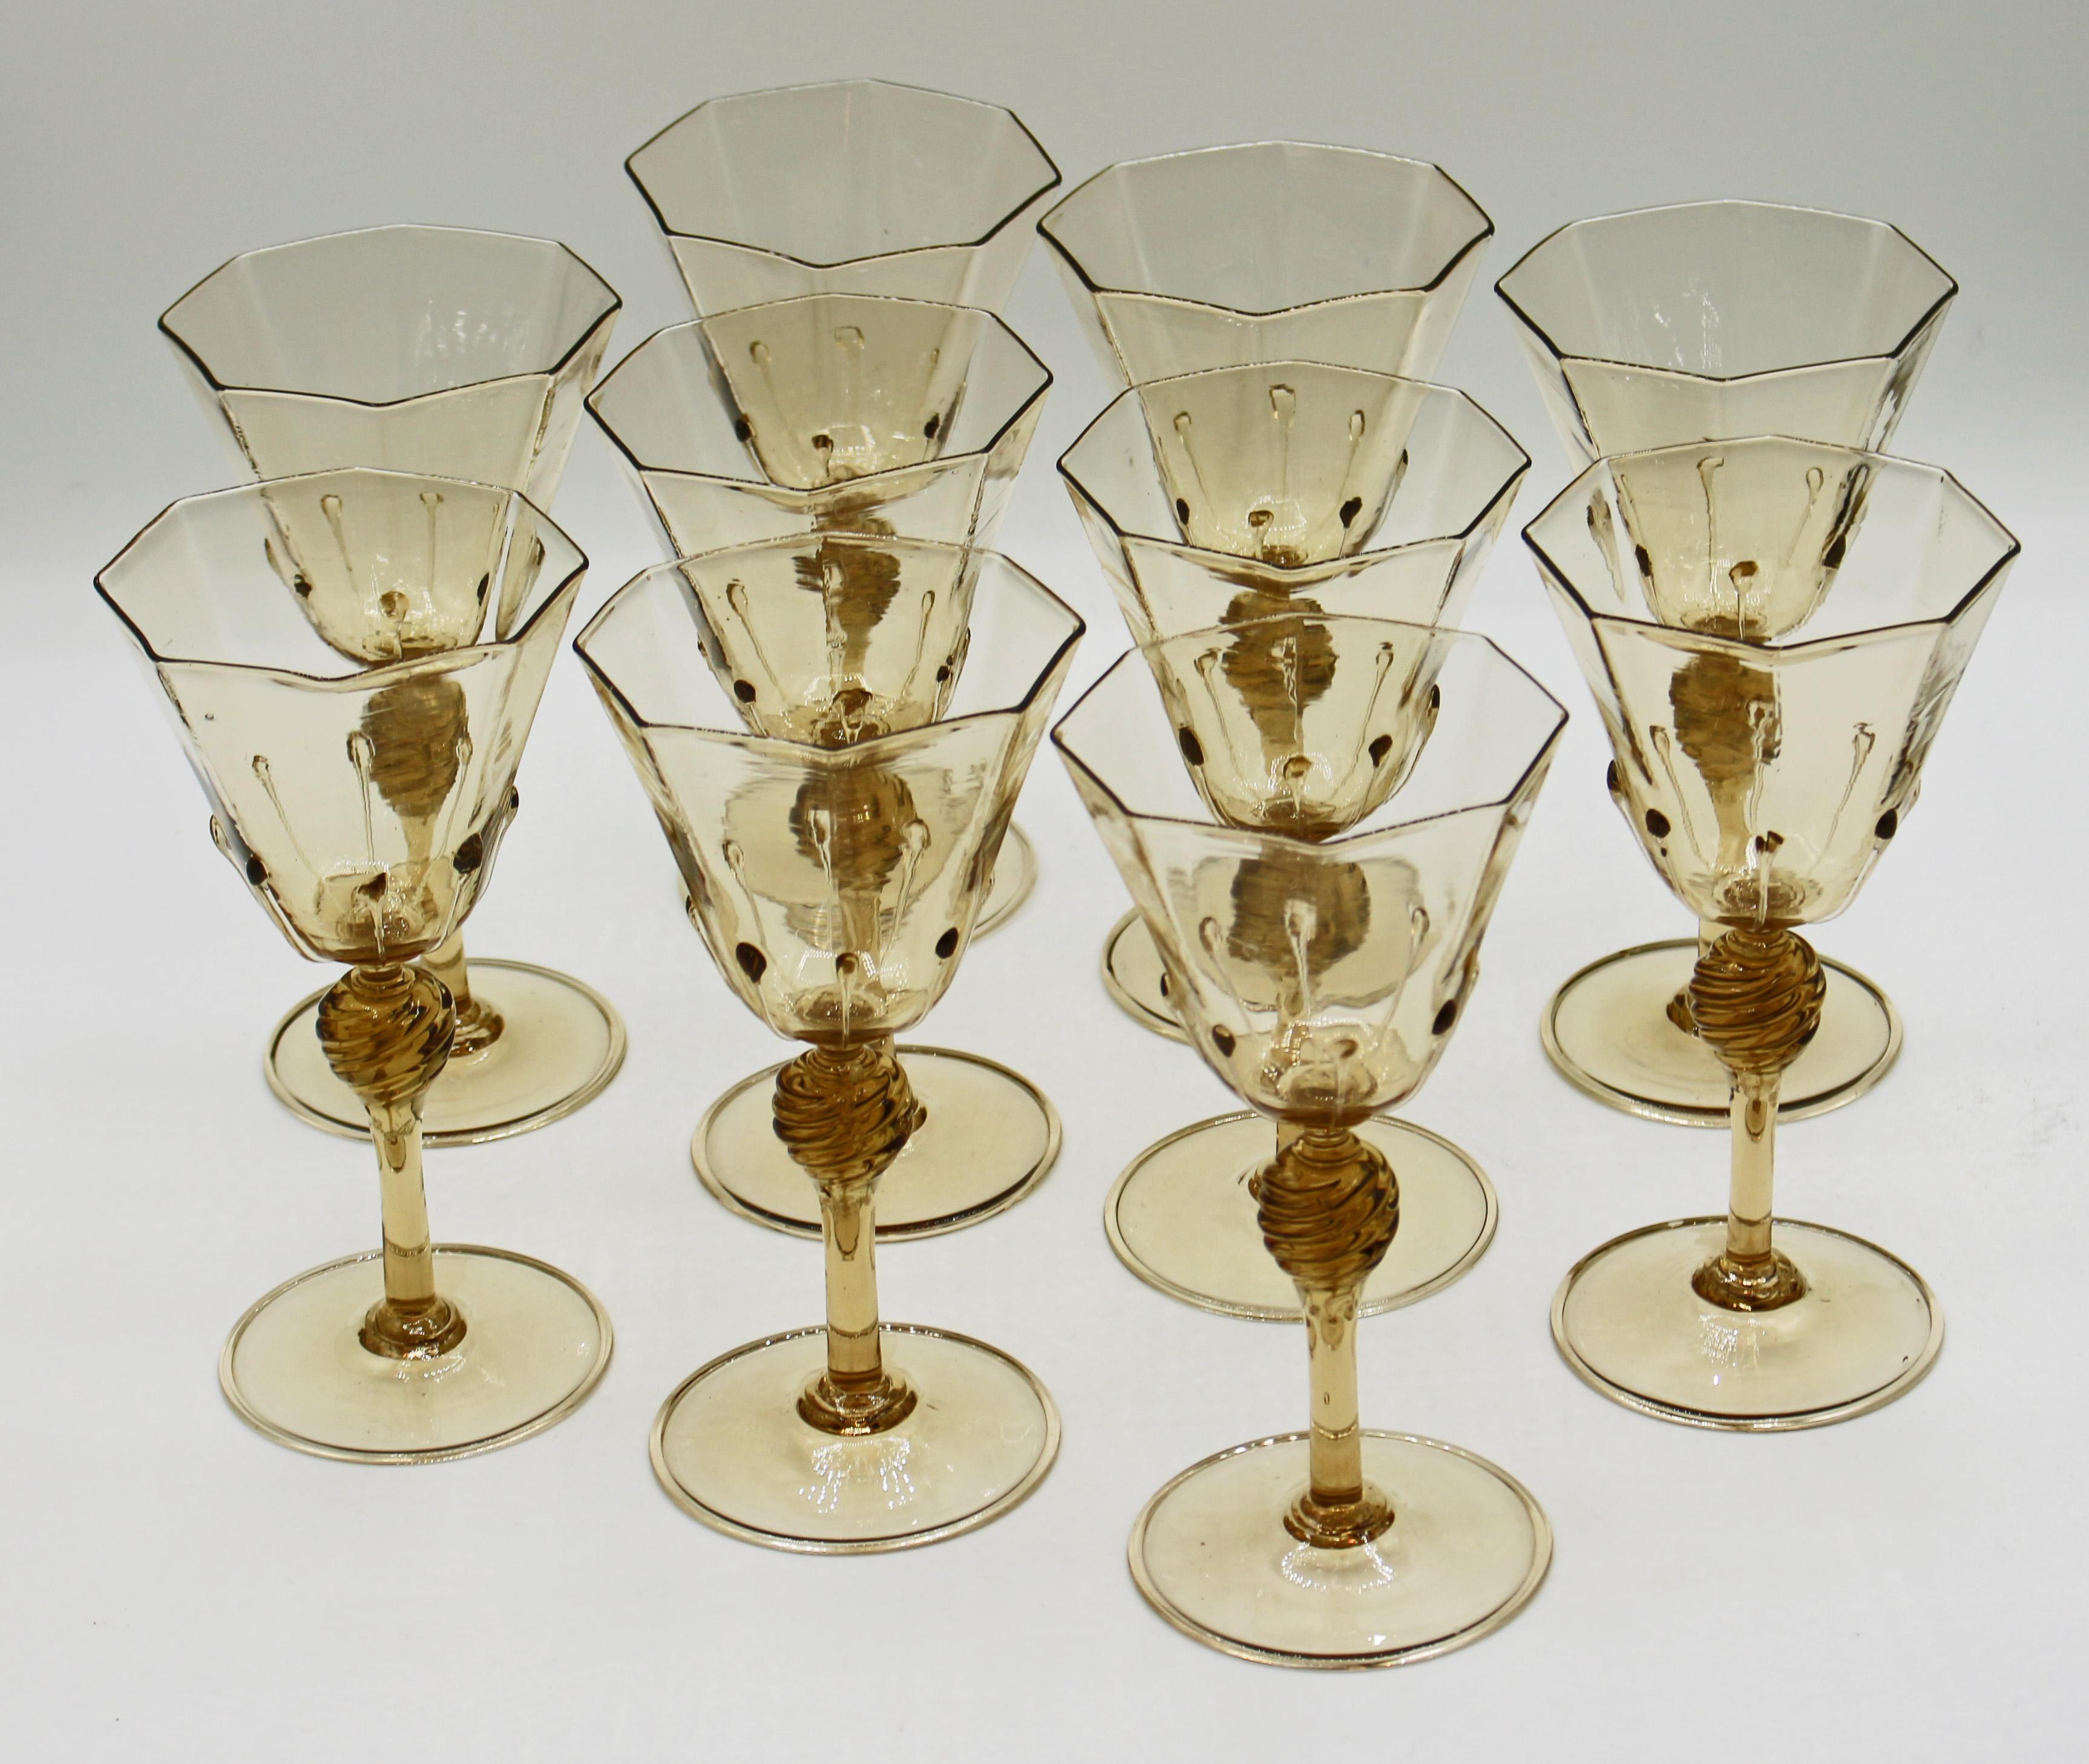 A set of ten Venetian goblets, blown glass for water or red wine, citrine to light topaz color, with twisted stem knop, 8-panelled bodies with droplets on each ridge. Each a tour de force of the glass blower's art. c.1925. Attributed to Salviati,